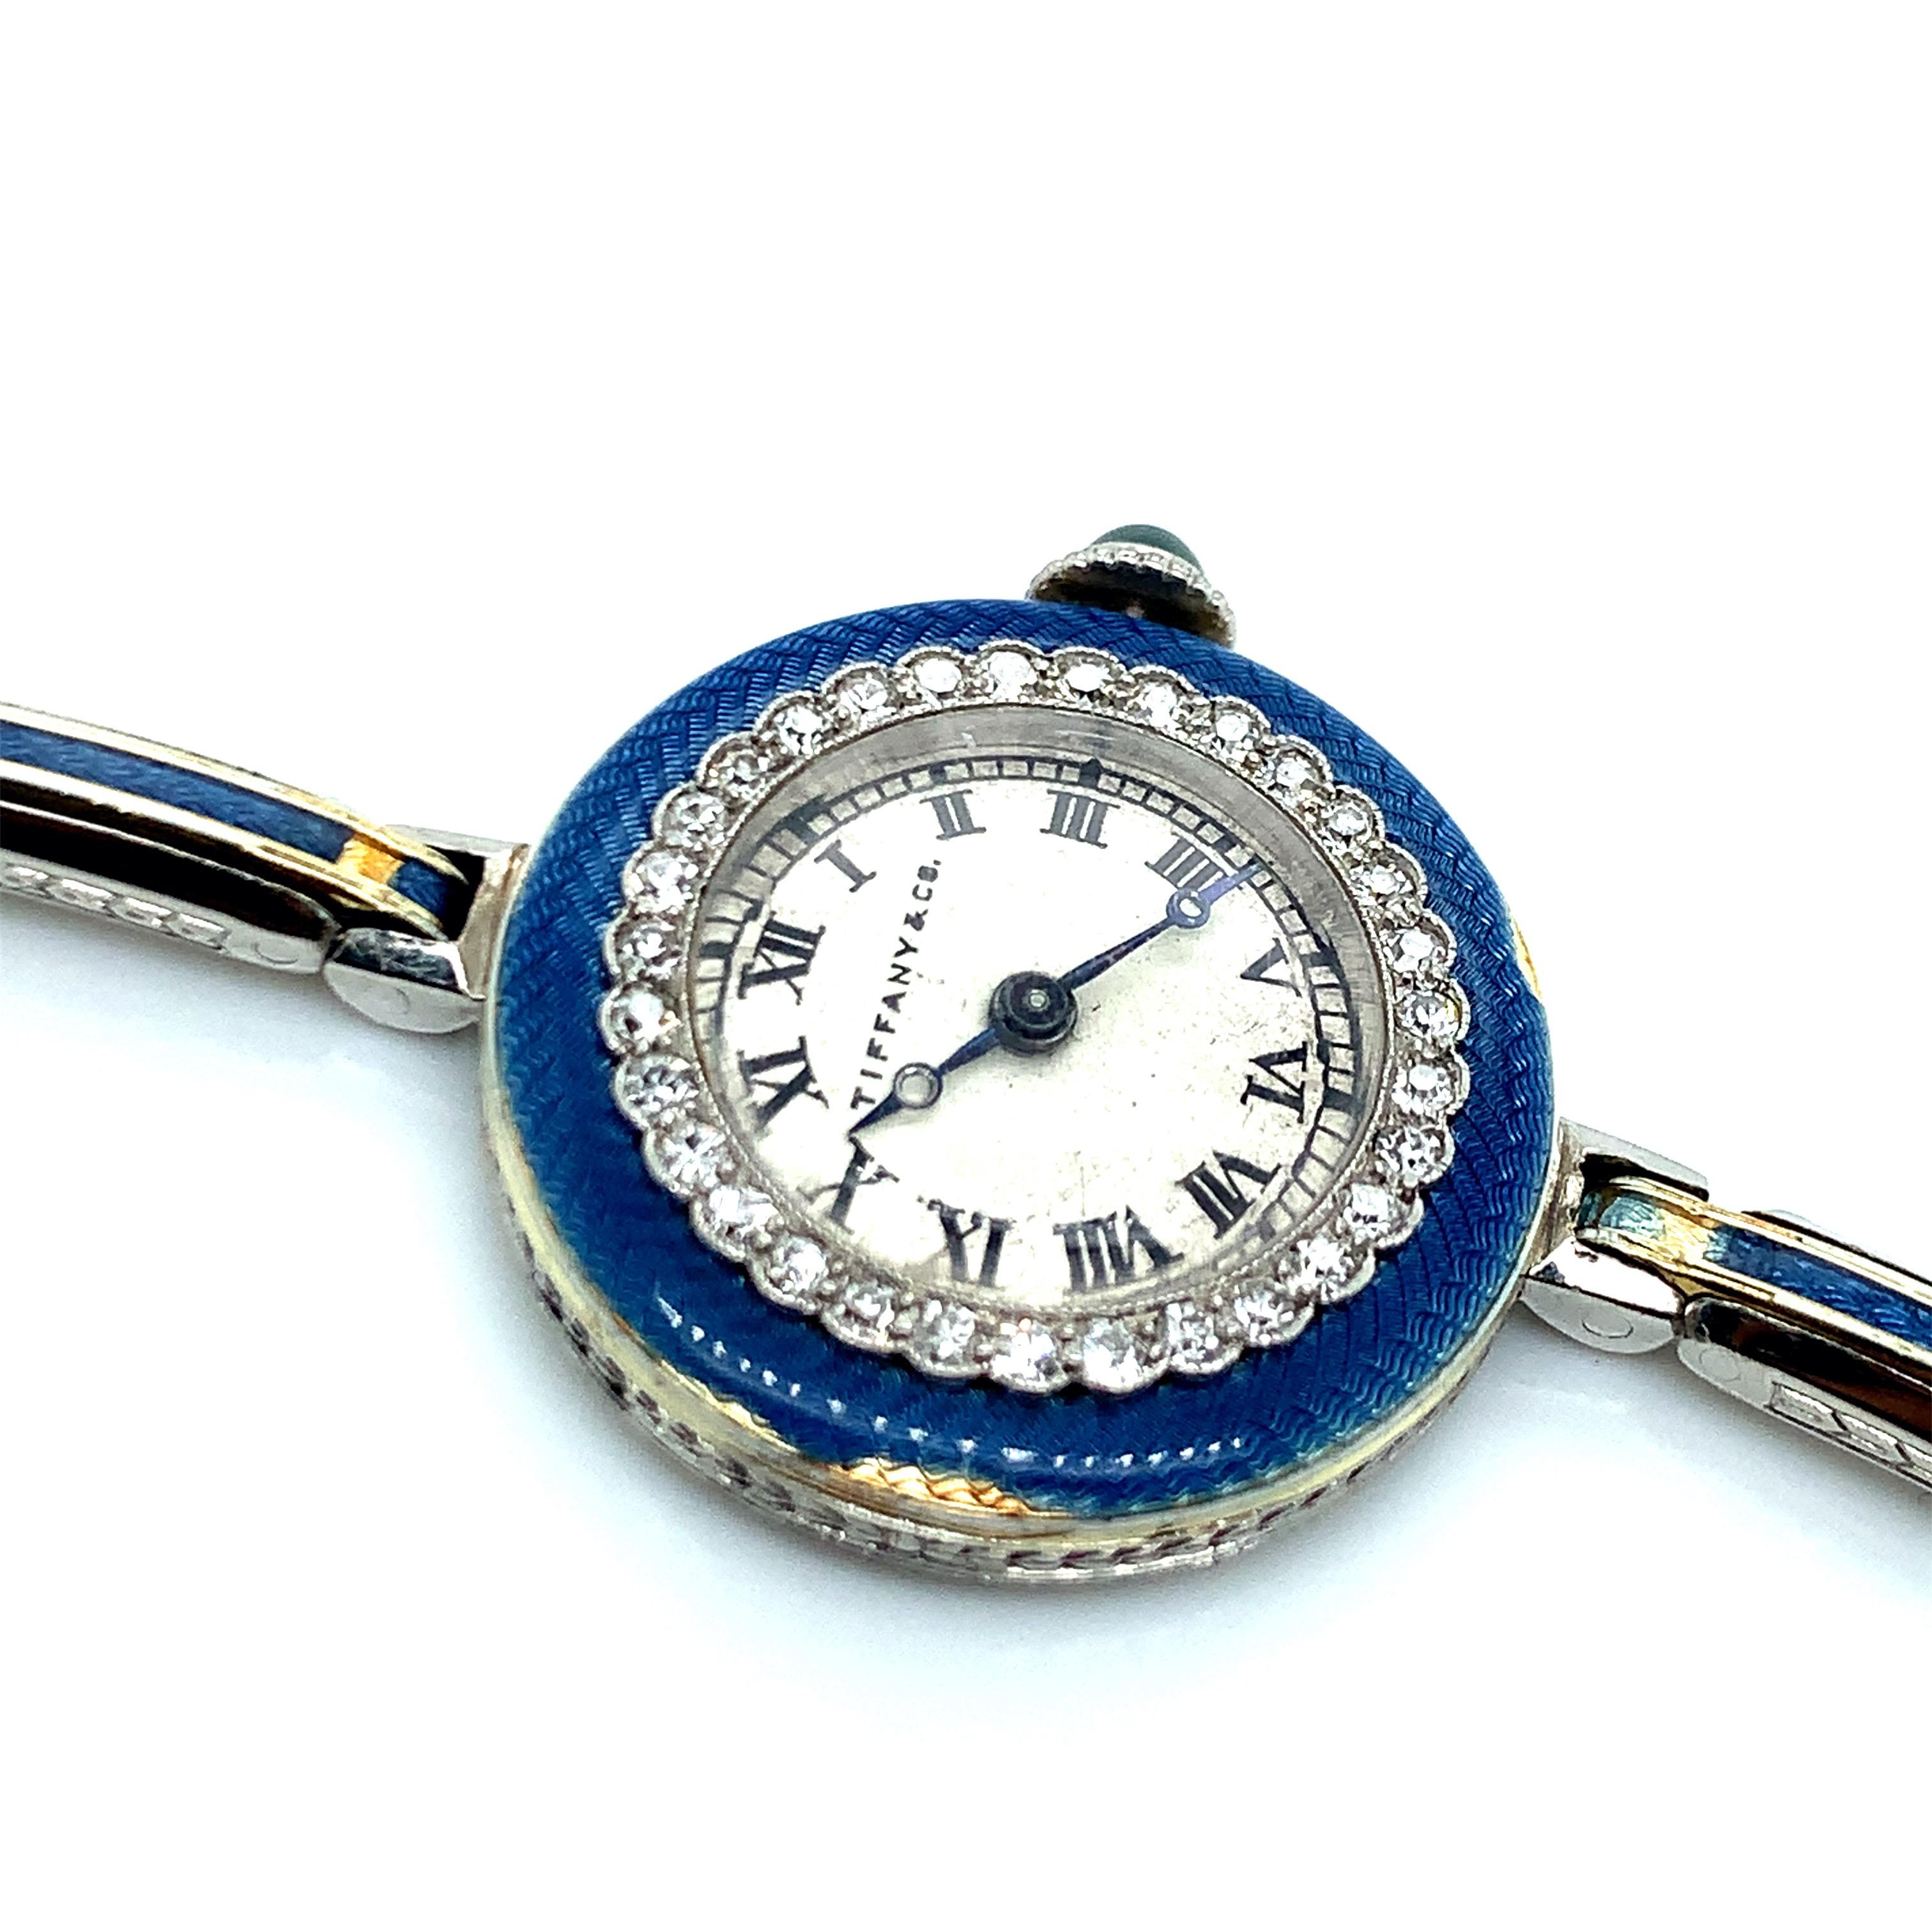 Tiffany & Co. platinum and gold diamond enamel expandable wristwatch. Meylan 17 jewel movement, 32 diamonds weighing approximately 1 carat. Inner circumference: 6.25 inches. Can expand to 7.25 inches. Case measurements: width and length are both 2.3